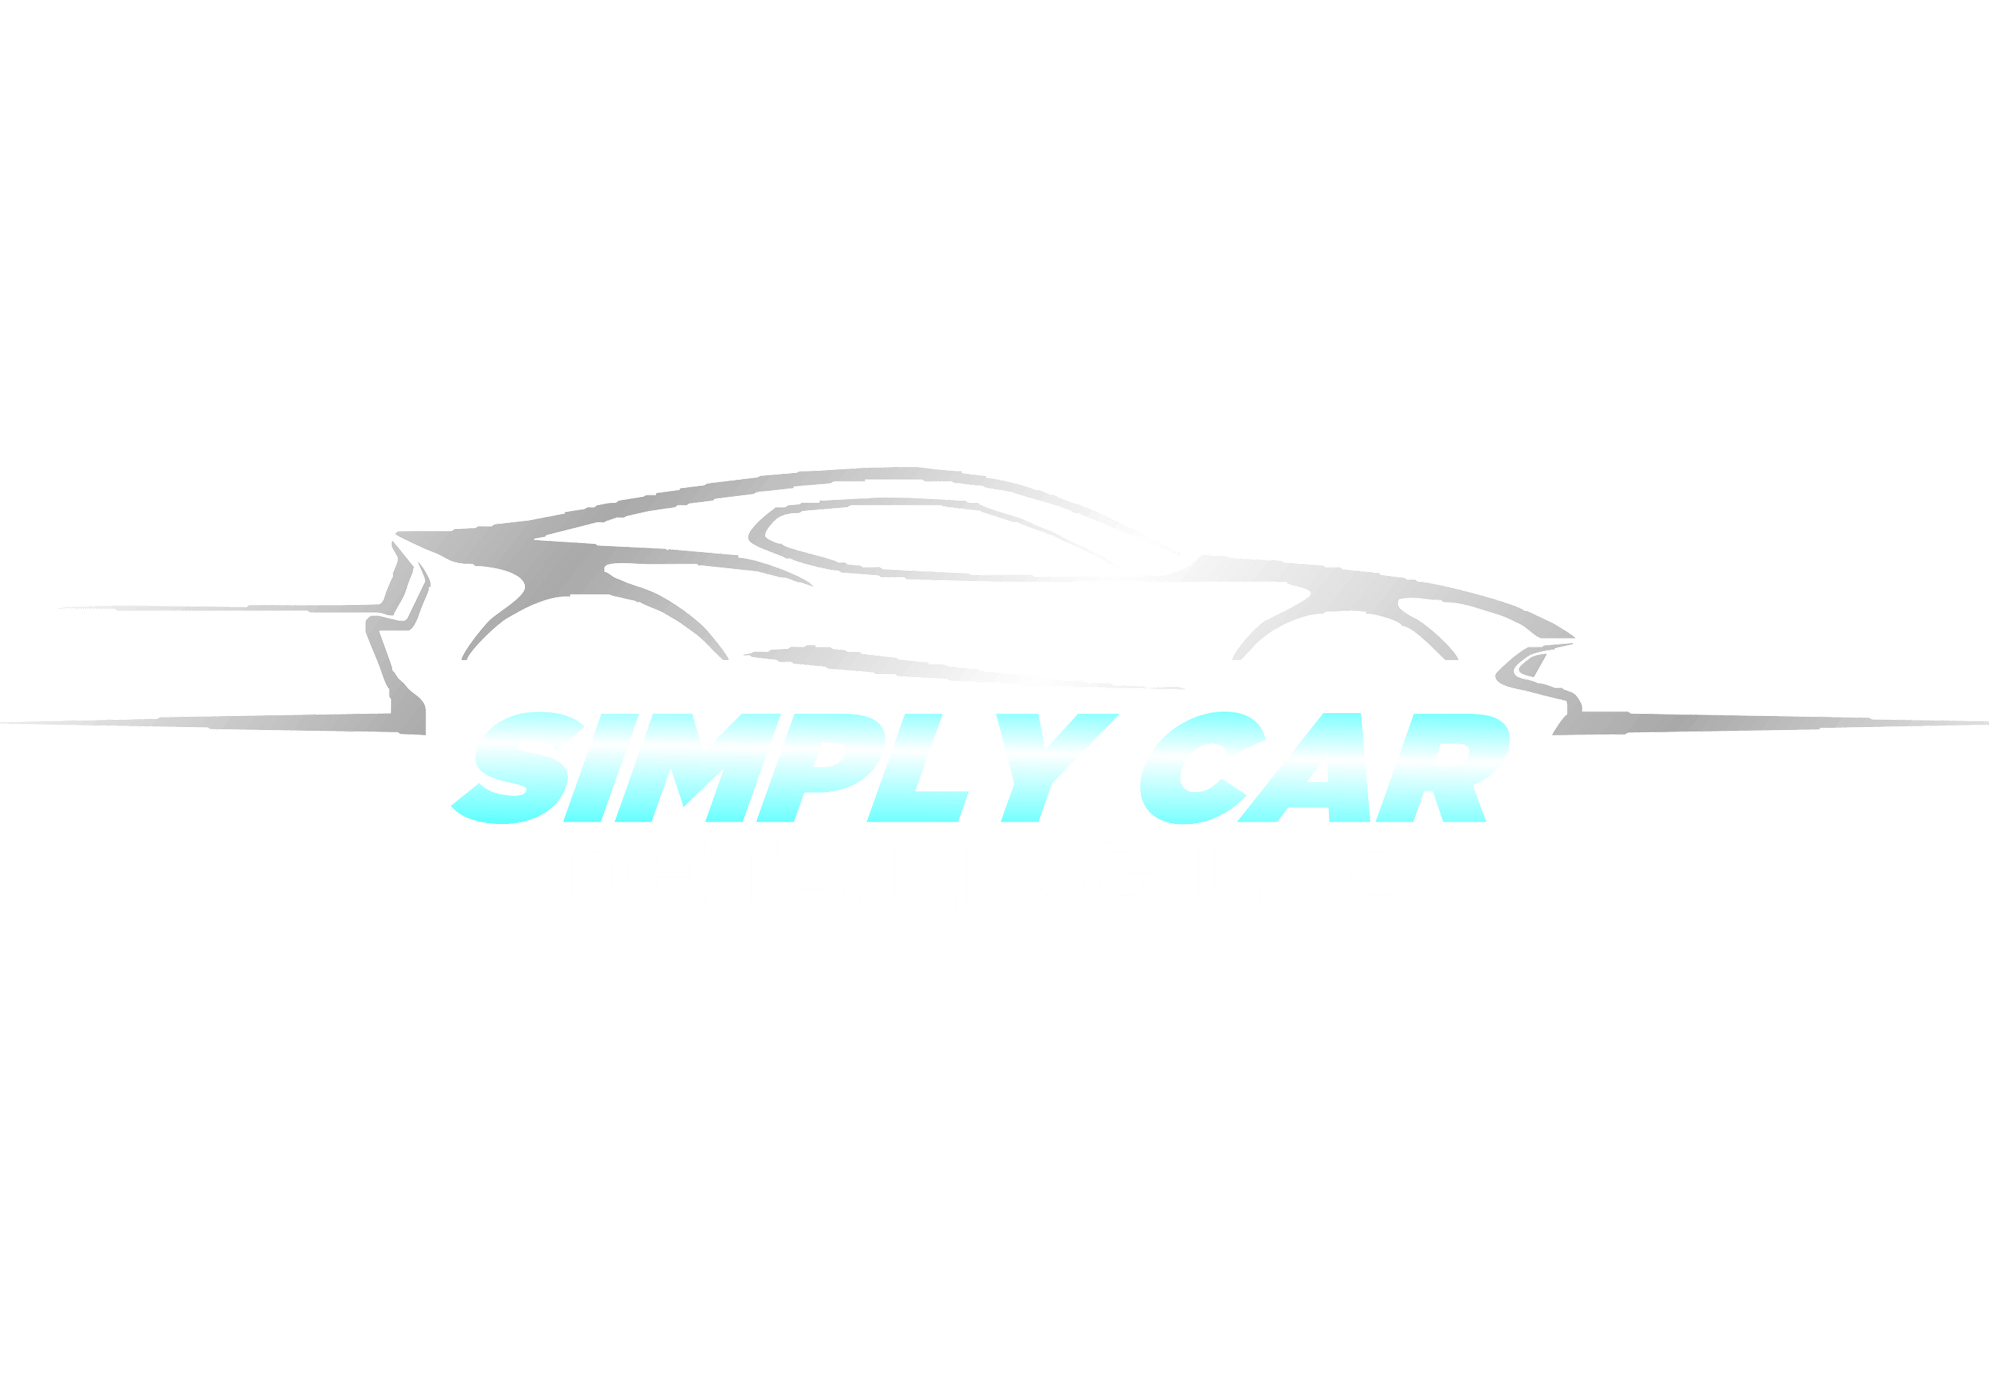 Car Detailing service in Williamsburg and surrounding area